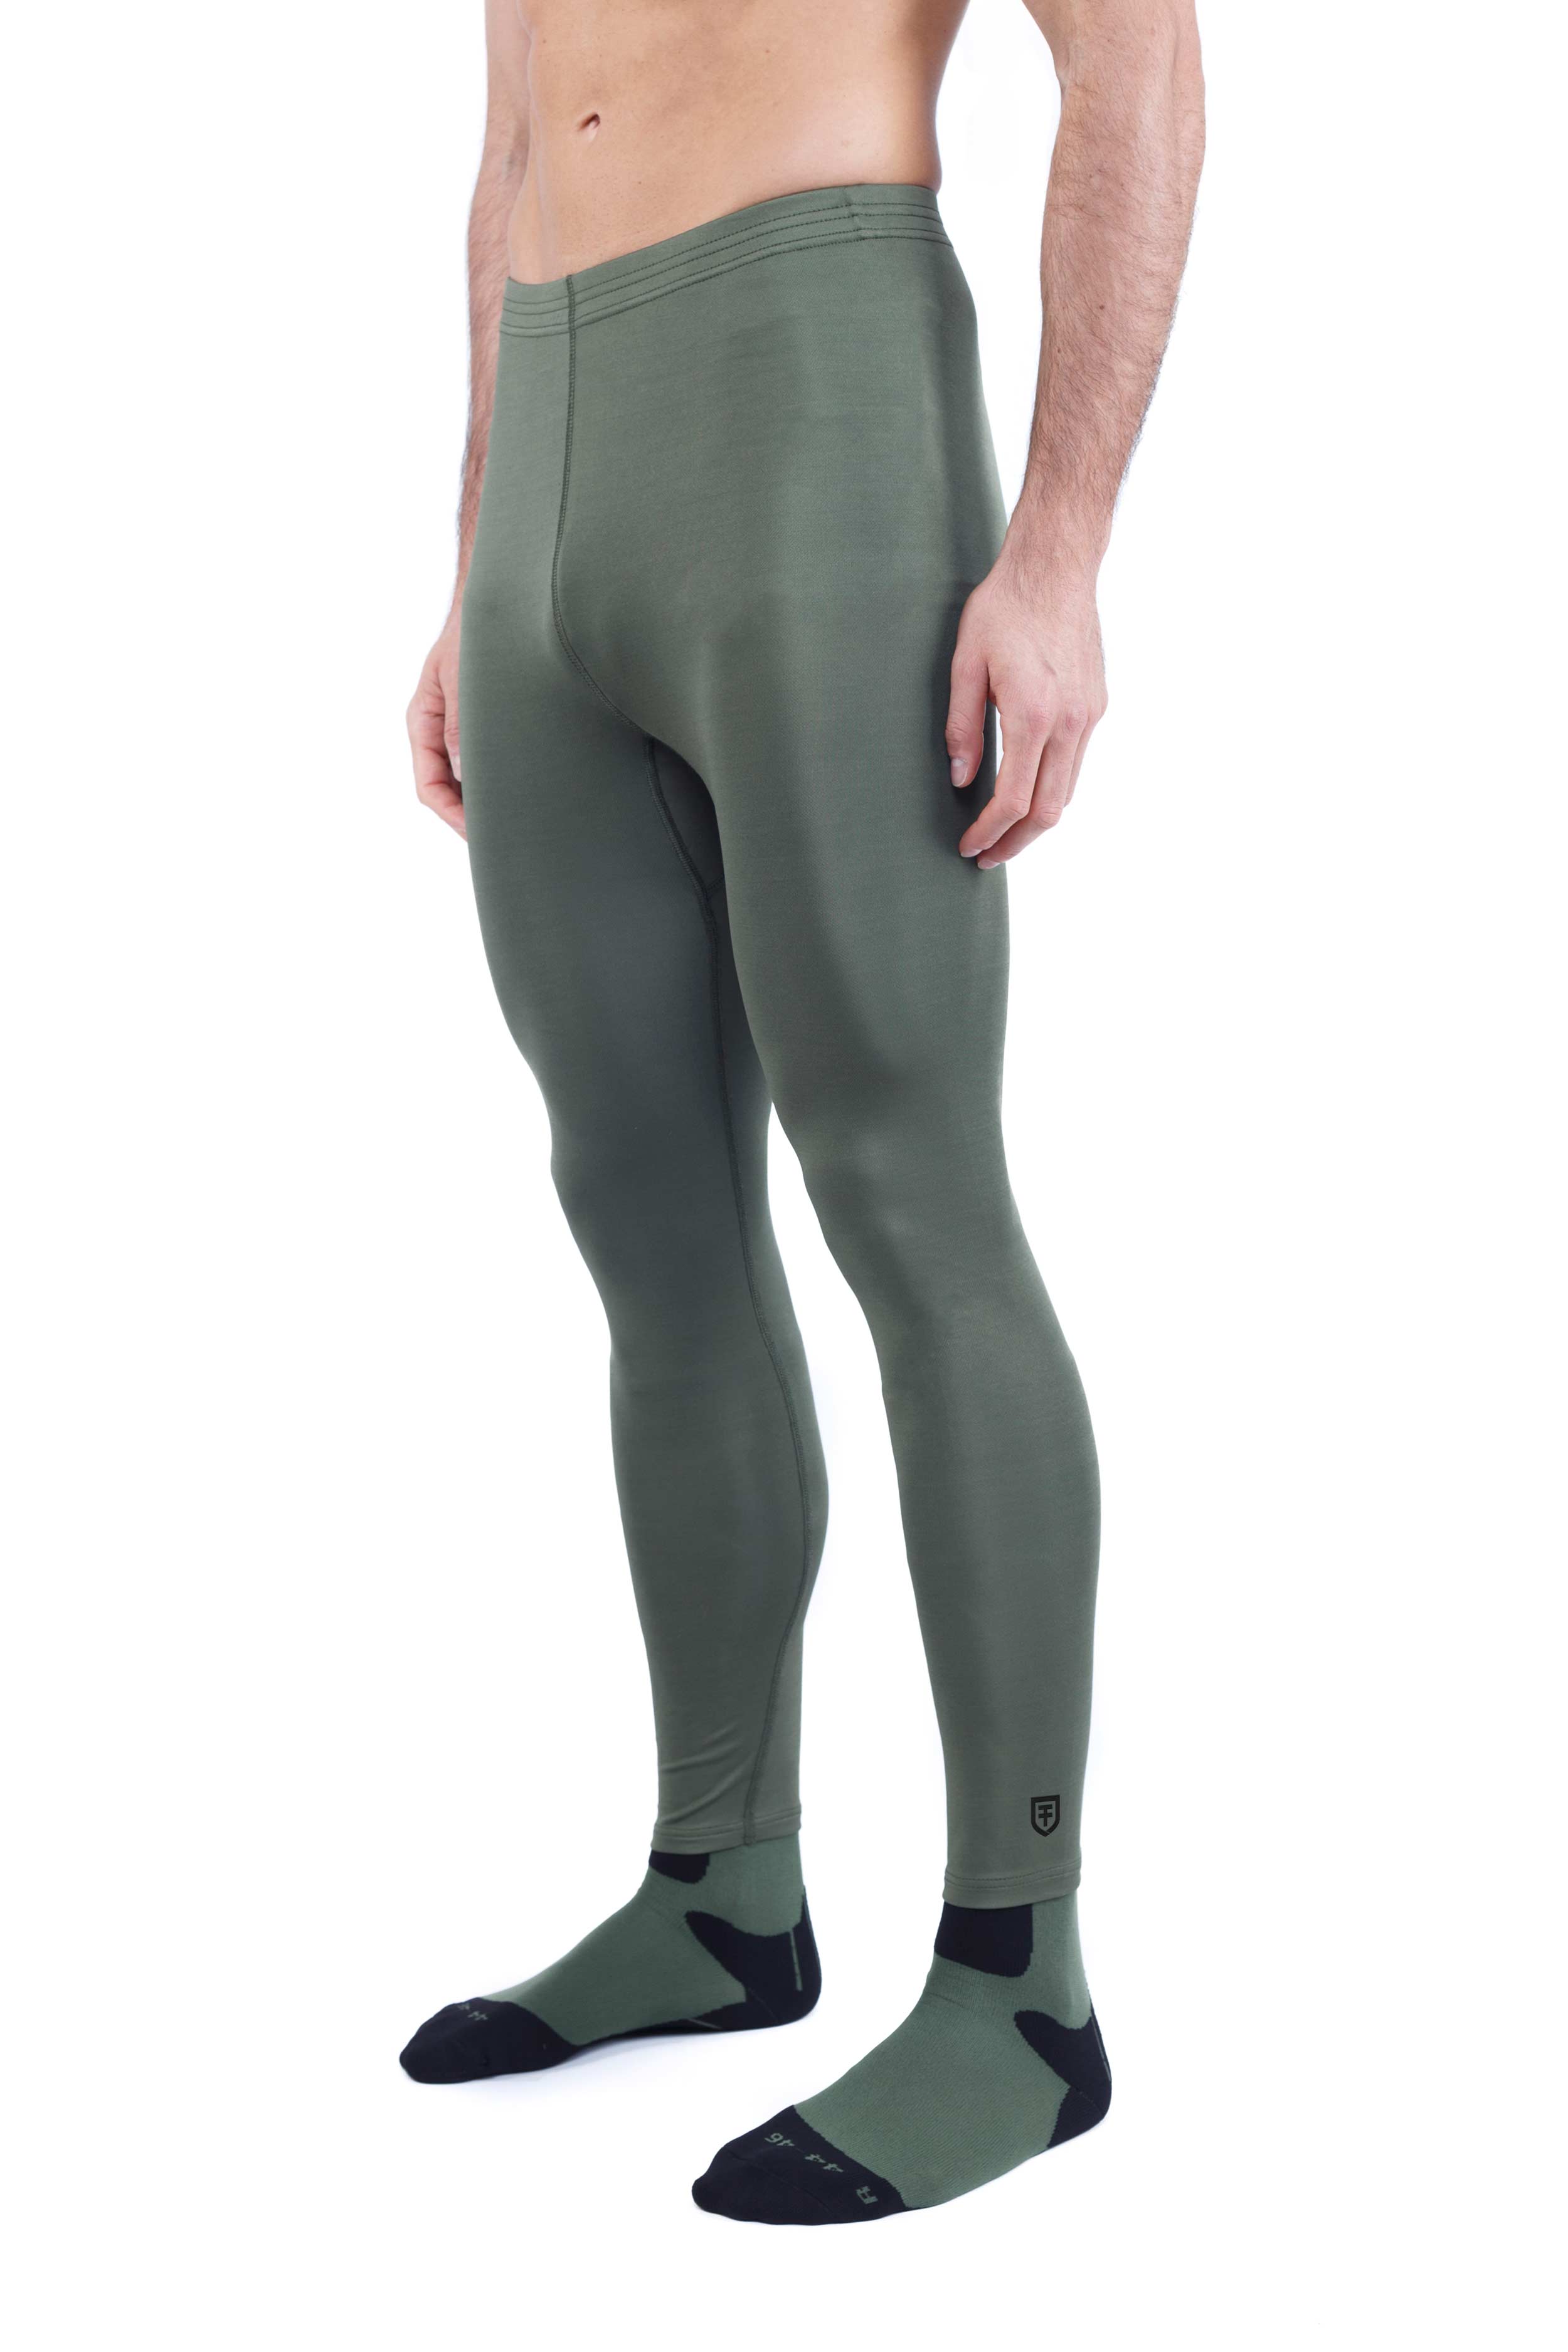 TACTICAL FIREPROOF THERMAL COMBAT UNDERPANTS